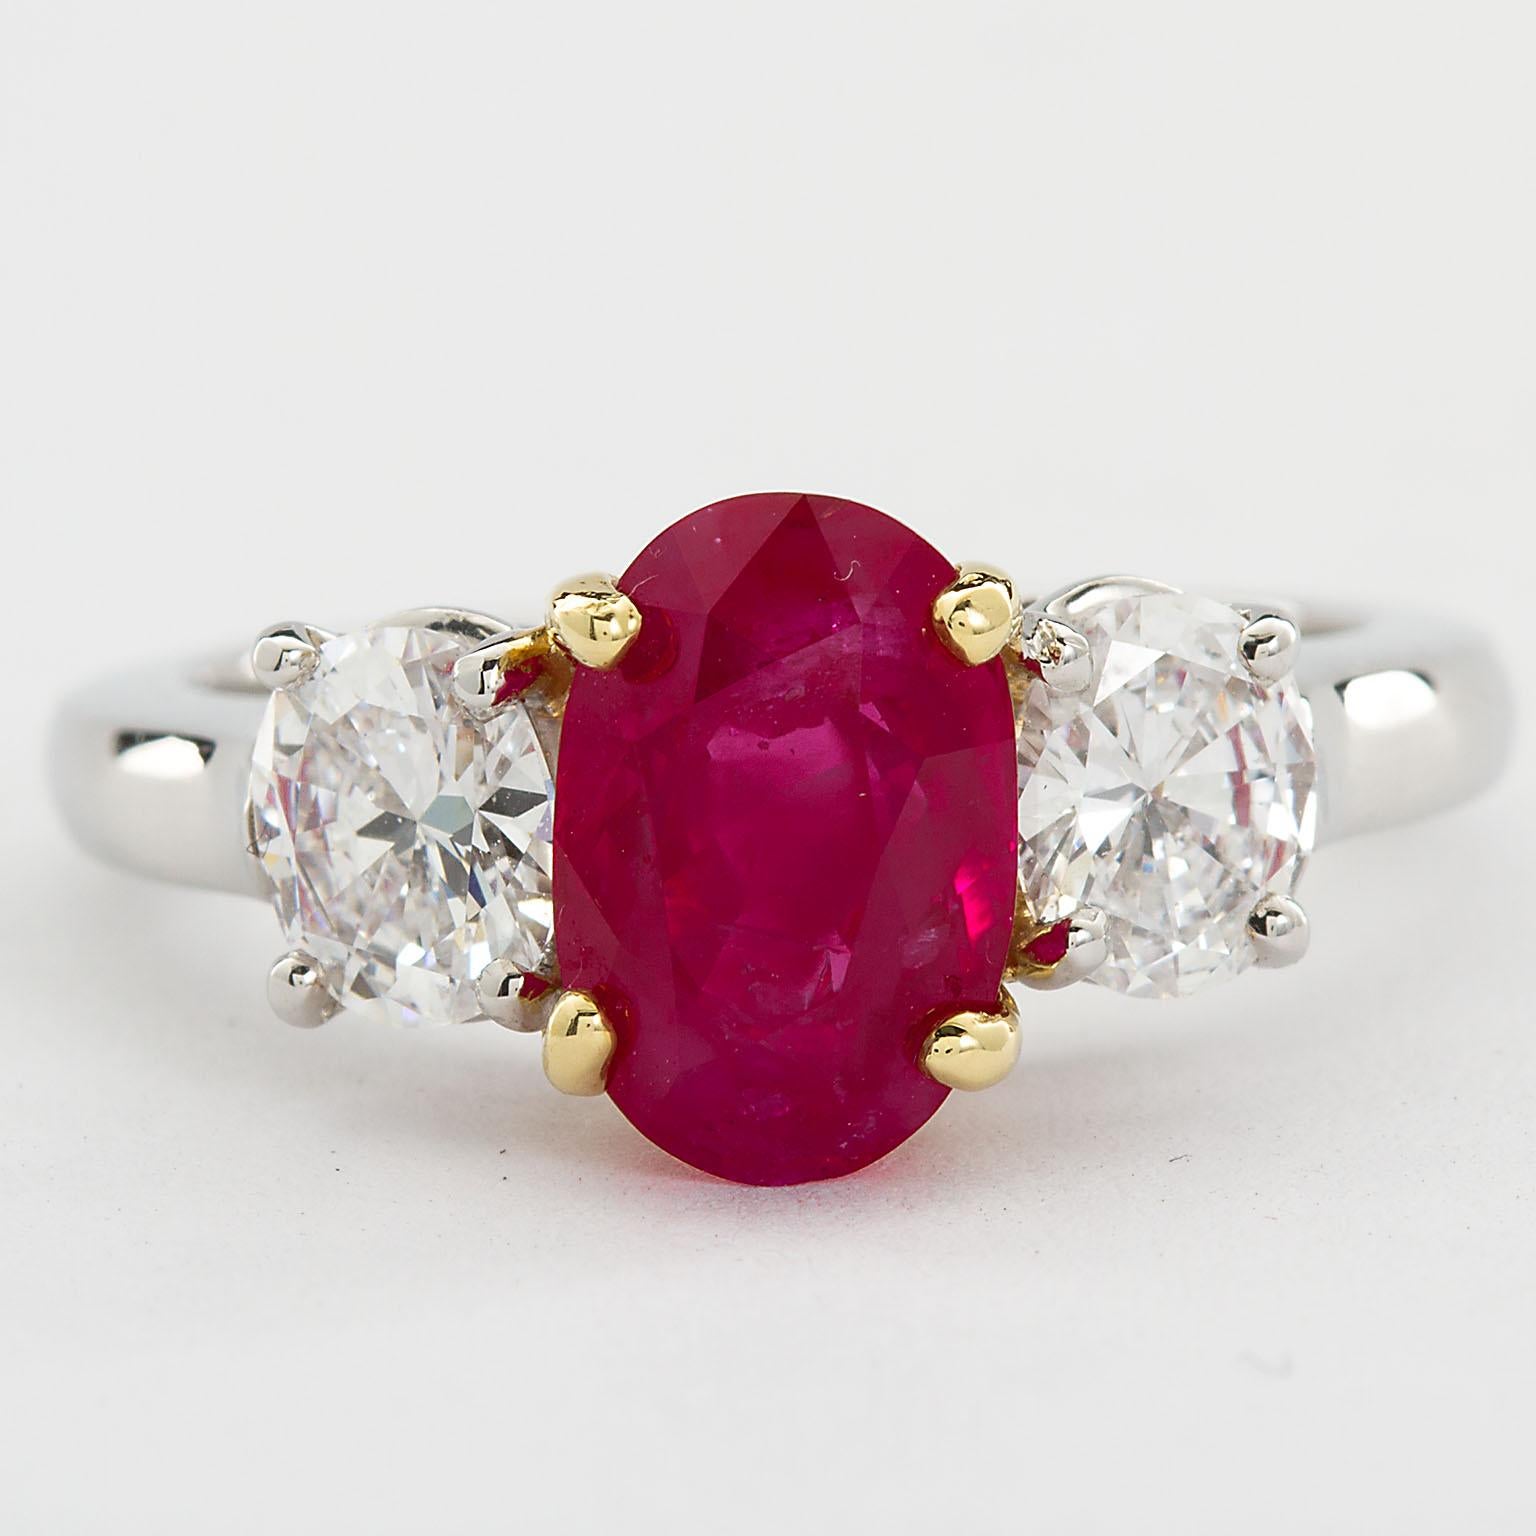 A classic platinum and 18k gold three-stone ring with a rare center Burma no-heat oval shape ruby weighing 2.64 ct, set between two diamond ovals weighing approx. 1.00 carat total. 
Ruby specs (Based on accompanying American Gemological Laboratories